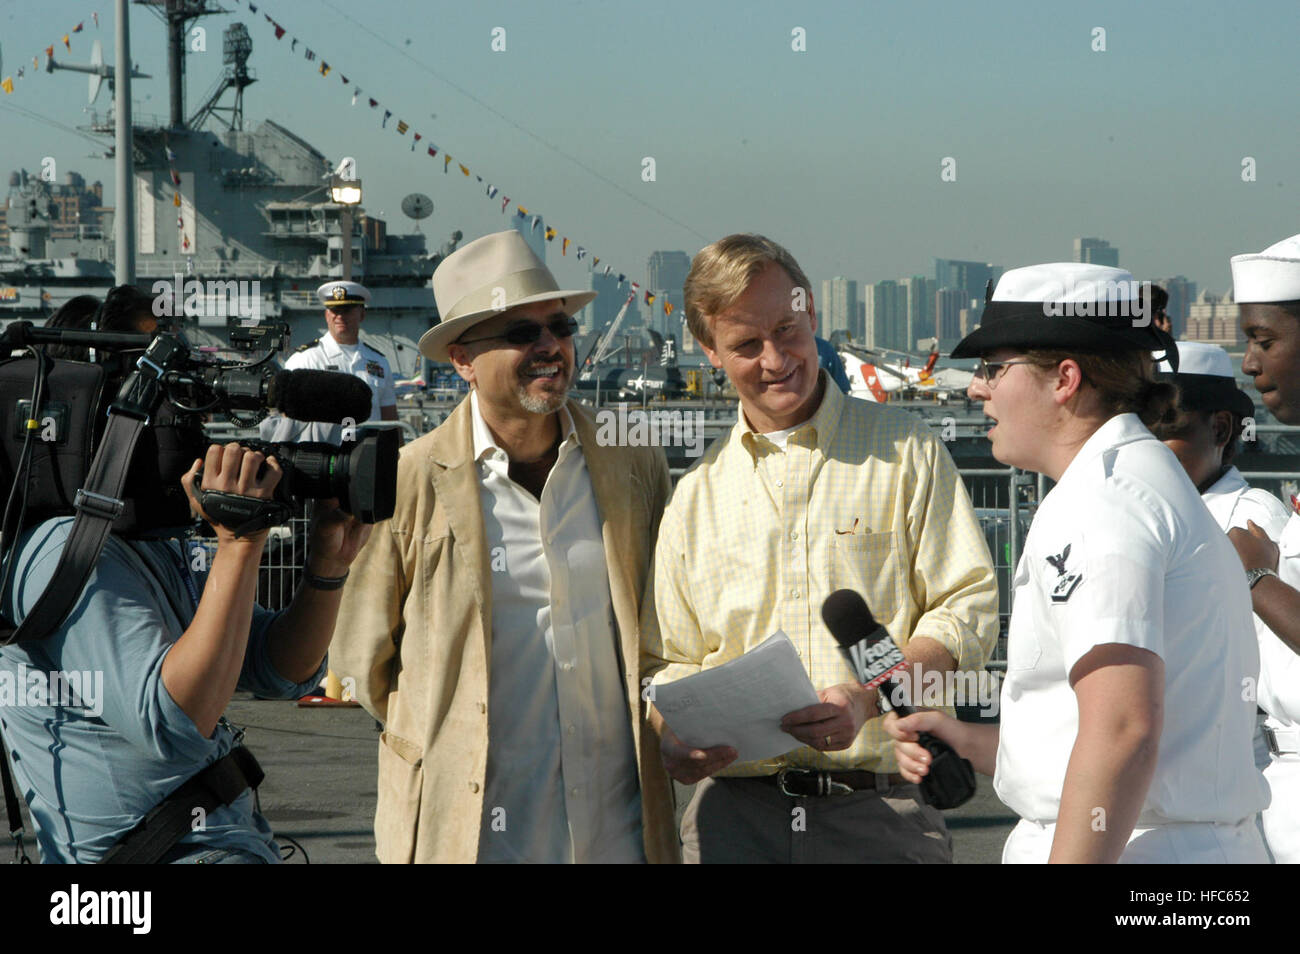 050527-N-7695R-006 New York City (May 27, 2005) Ð Actor Joe Pantoliano, left, and News Anchor and Co-Host of Fox and Friends, Steve Doocey, center, speak with a Sailor aboard USS John F. Kennedy (CV 67) during Fox News coverage of Fleet Week 2005. Fleet Week allows the community to celebrate the sacrifices made by the U.S. Navy, Marine Corps, and Coast Guard by giving them the opportunity to visit the city and experience the ÒBig Apple'sÓ hospitality. U.S. Navy photo by PhotographerÕs Mate Airman Anthony Riddle (RELEASED) Joe Pantoliano Navy uncropped Stock Photo